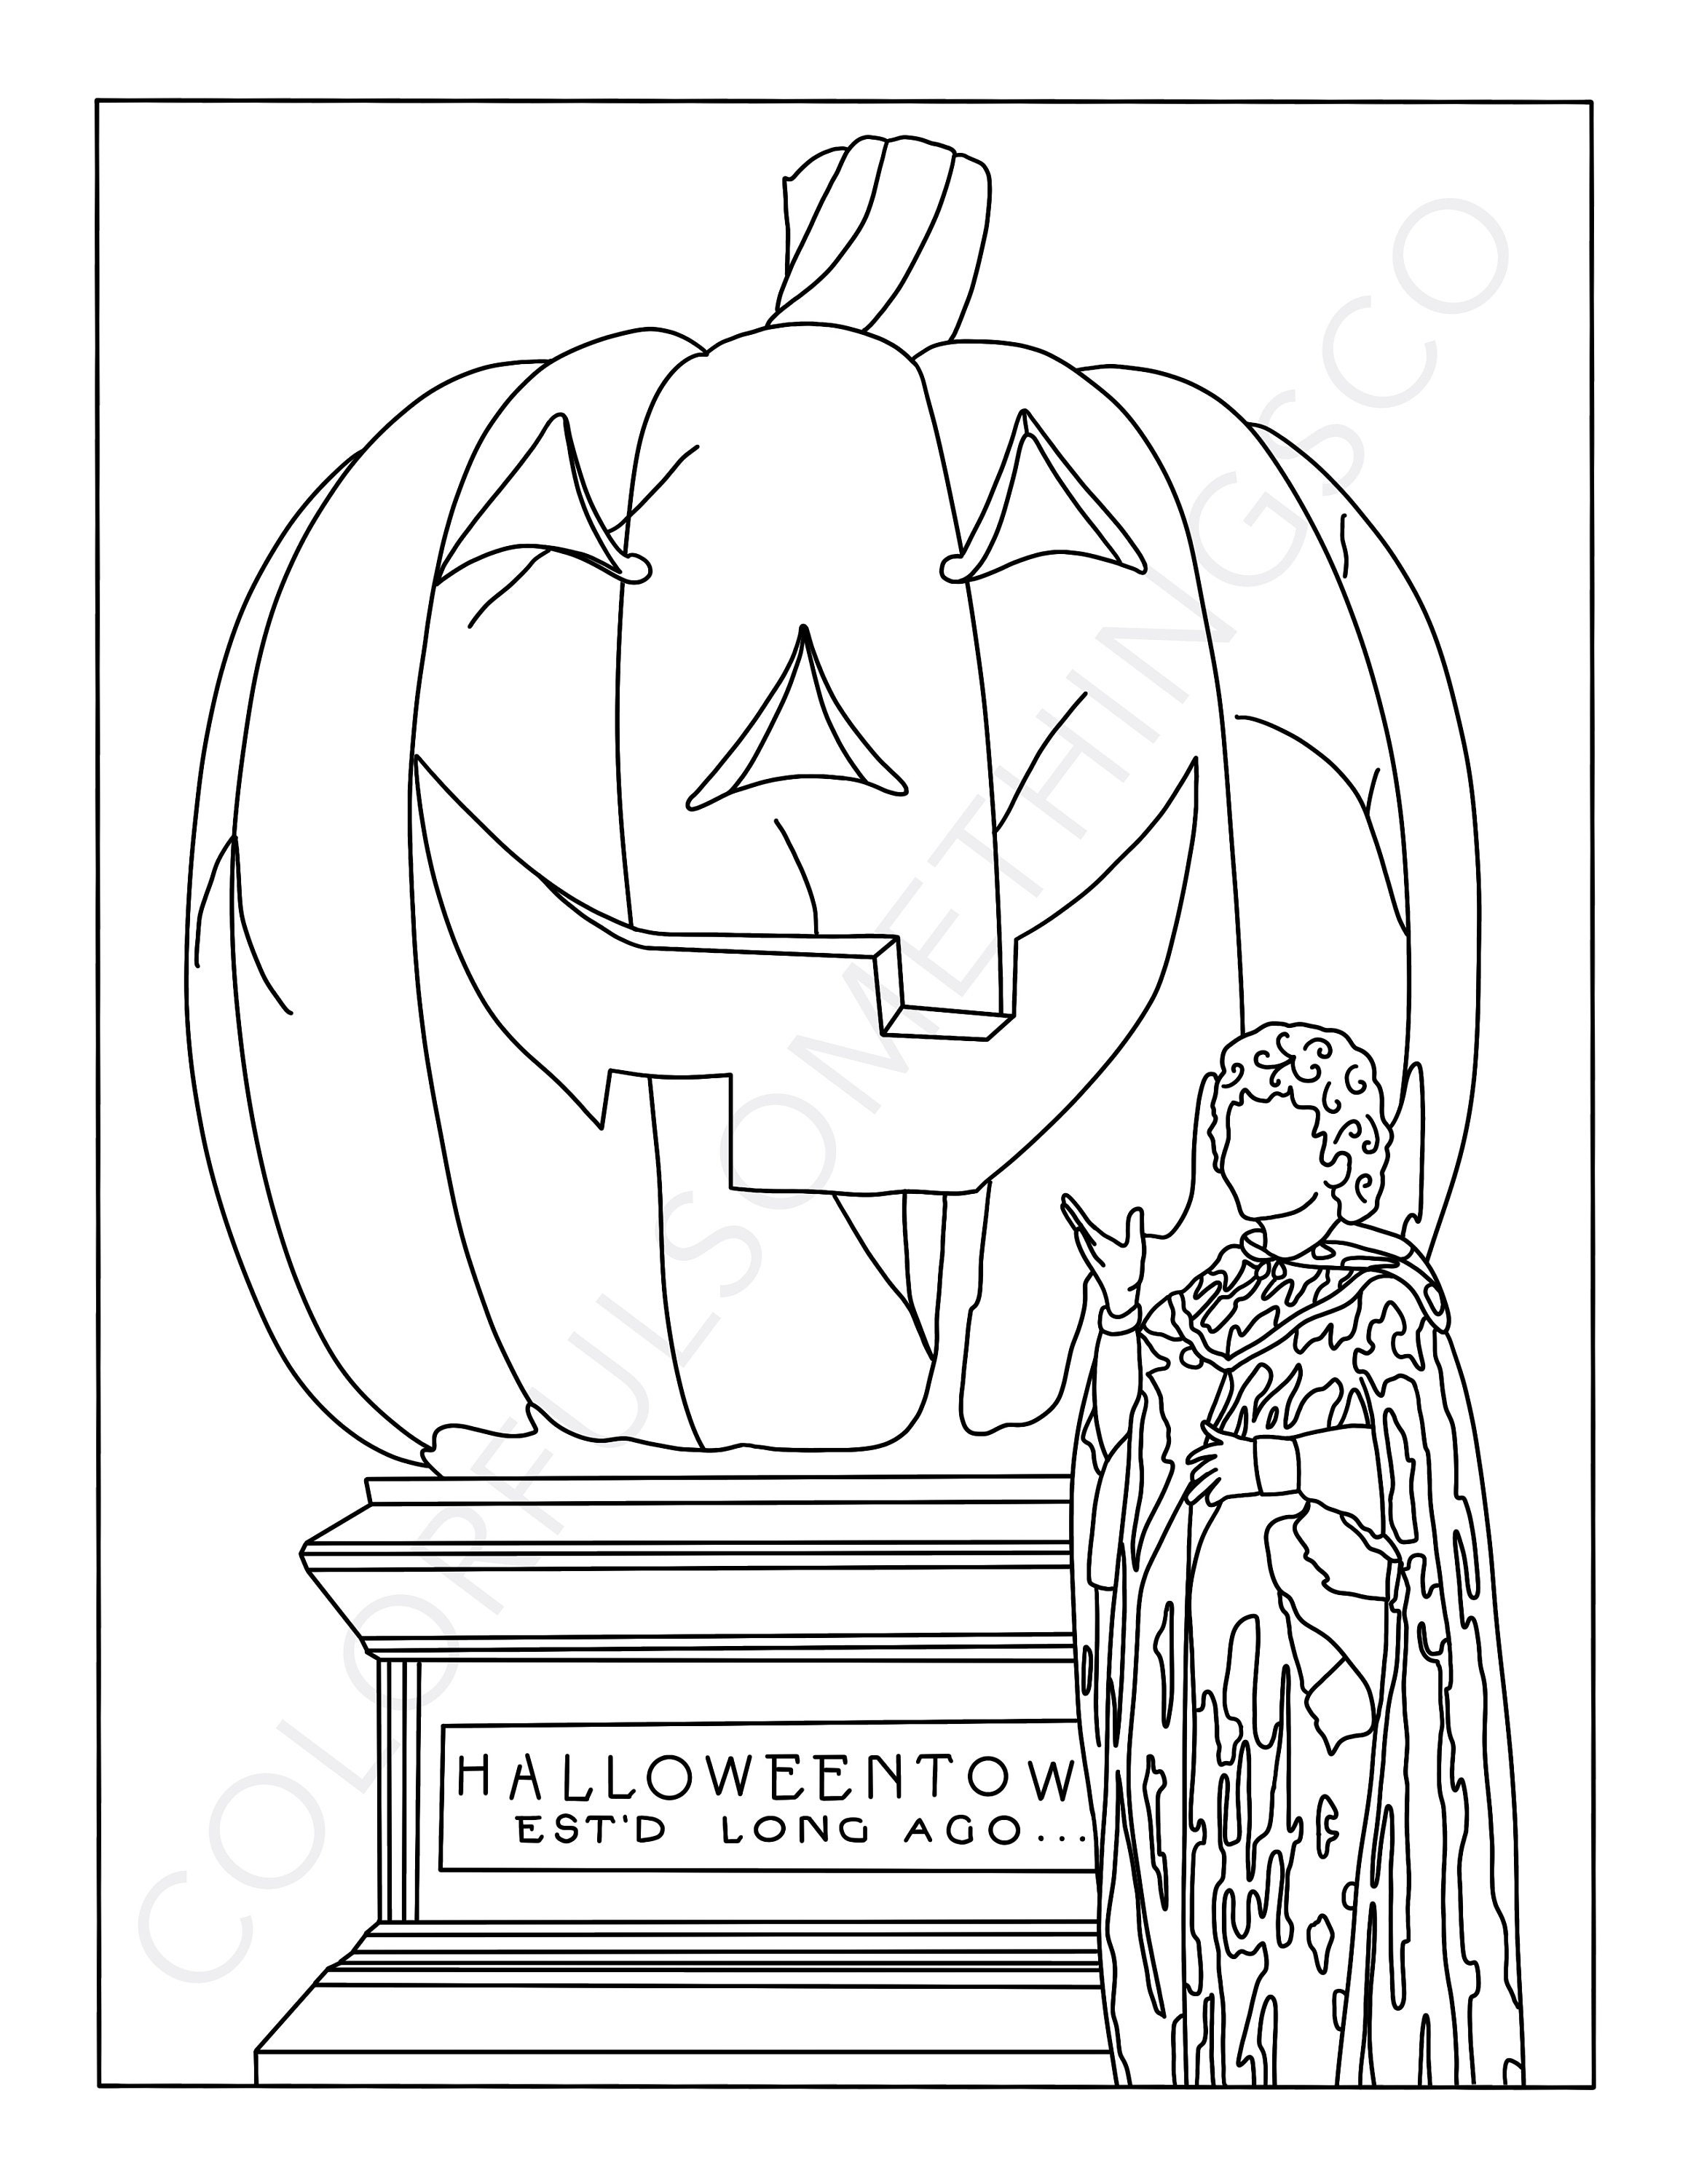 Halloweentown movie coloring pages pack of digital download coloring pages halloween coloring pages